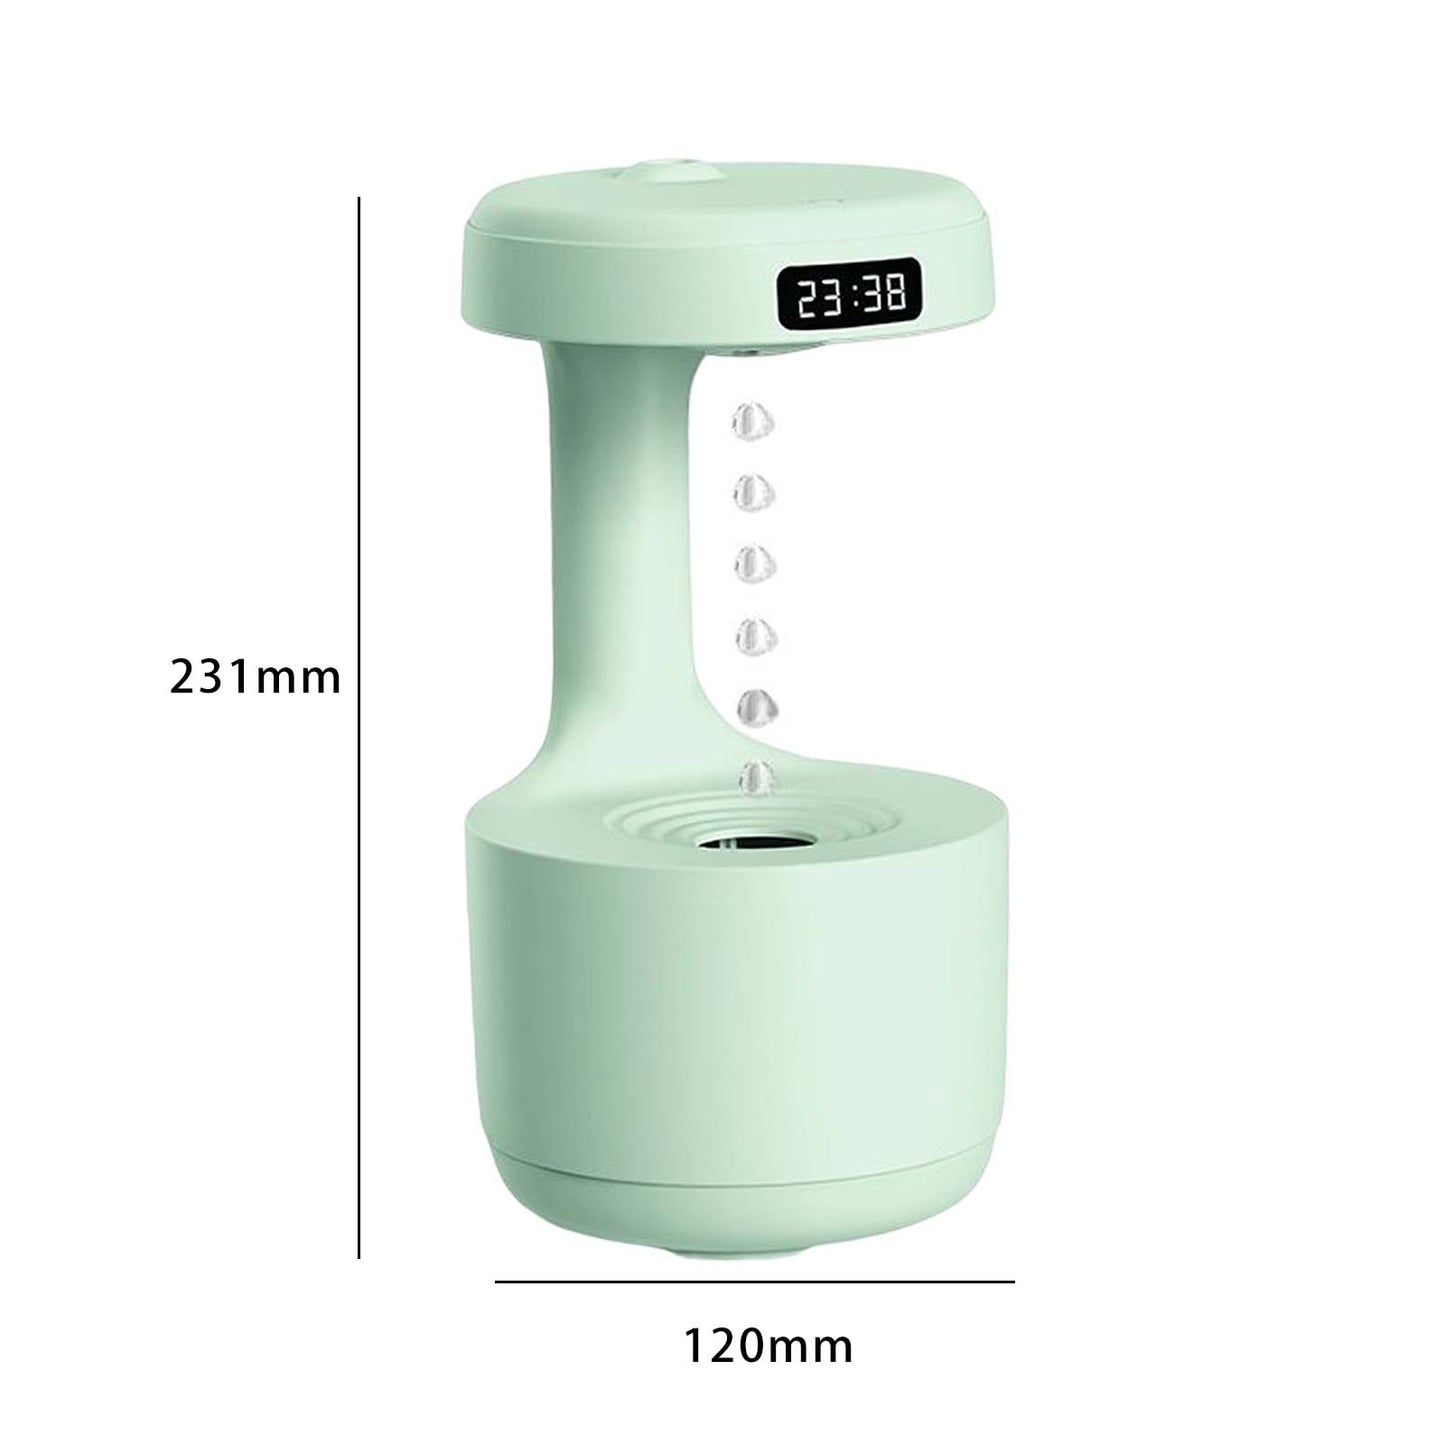 800ML Anti-Gravity Water Droplets Diffuser Air Humidifier Cool Mist Maker Fogger with LED Display Office Bedroom Desktop